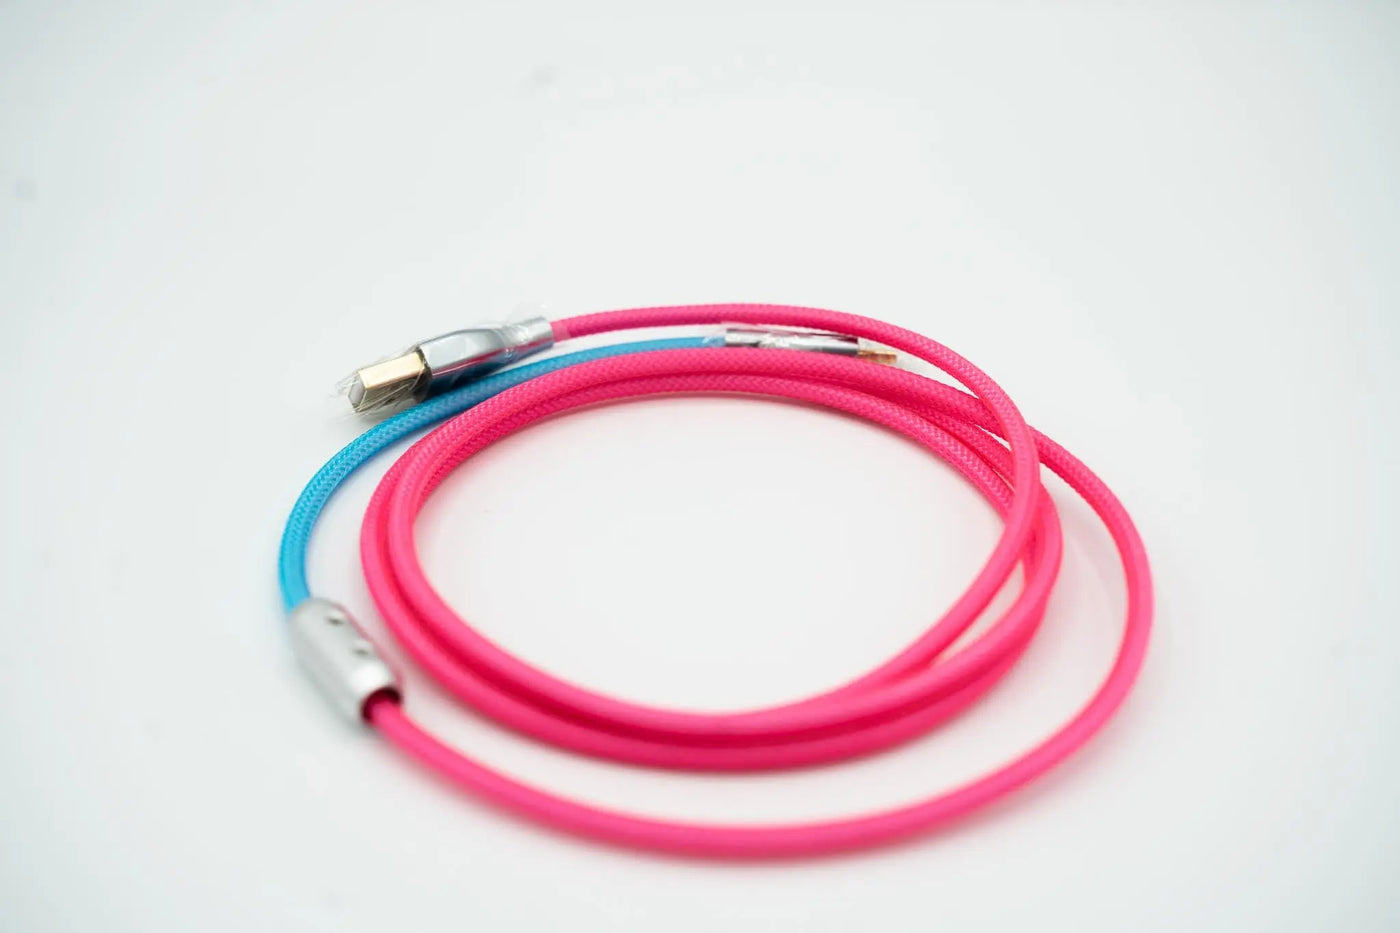 Pink and Blue Straight Cables Type C USB for Keyboard Vyral